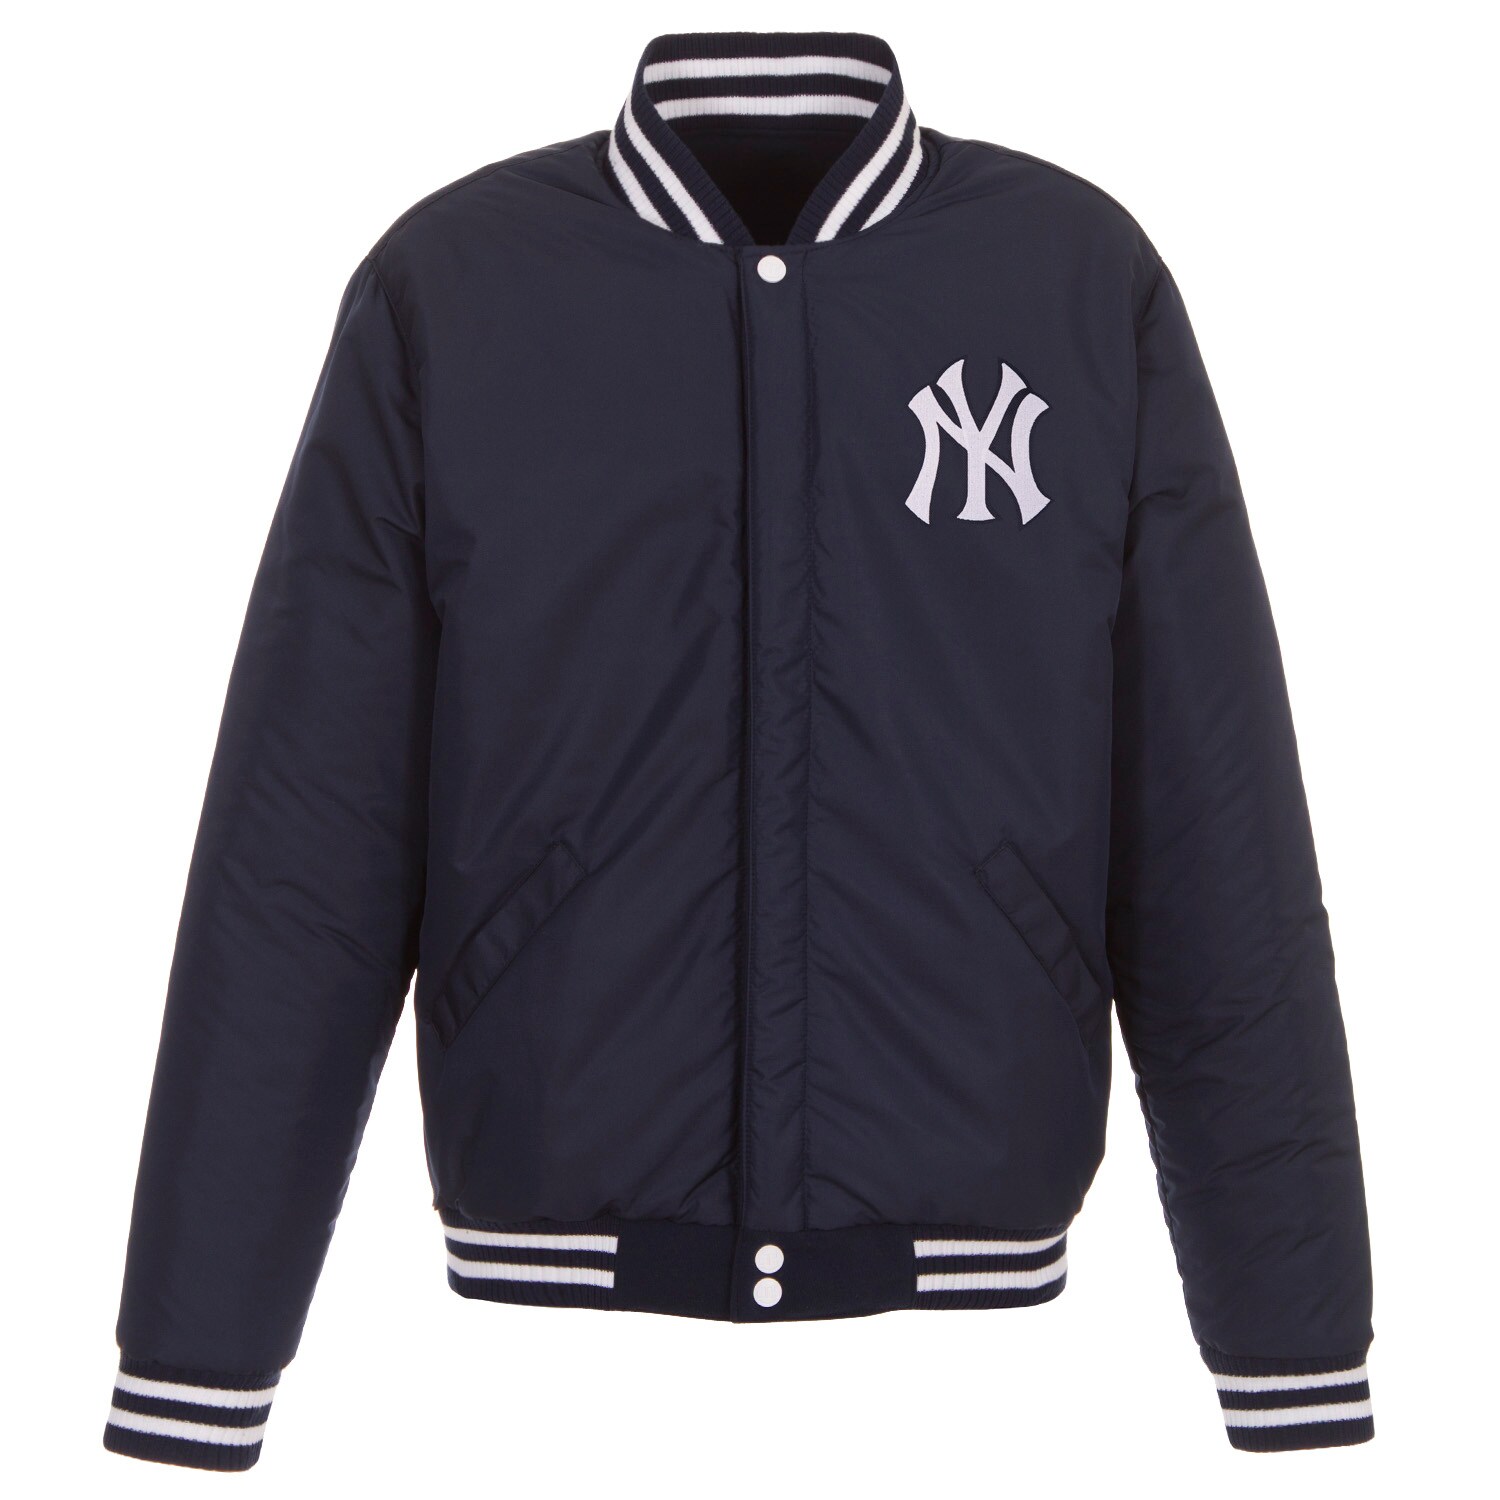 mens-jh-design-navy-new-york-yankees-reversible-fleece-jacket-with-faux-leather-sleeves_pi3237000_altimages_ff_3237082alt1_full-2